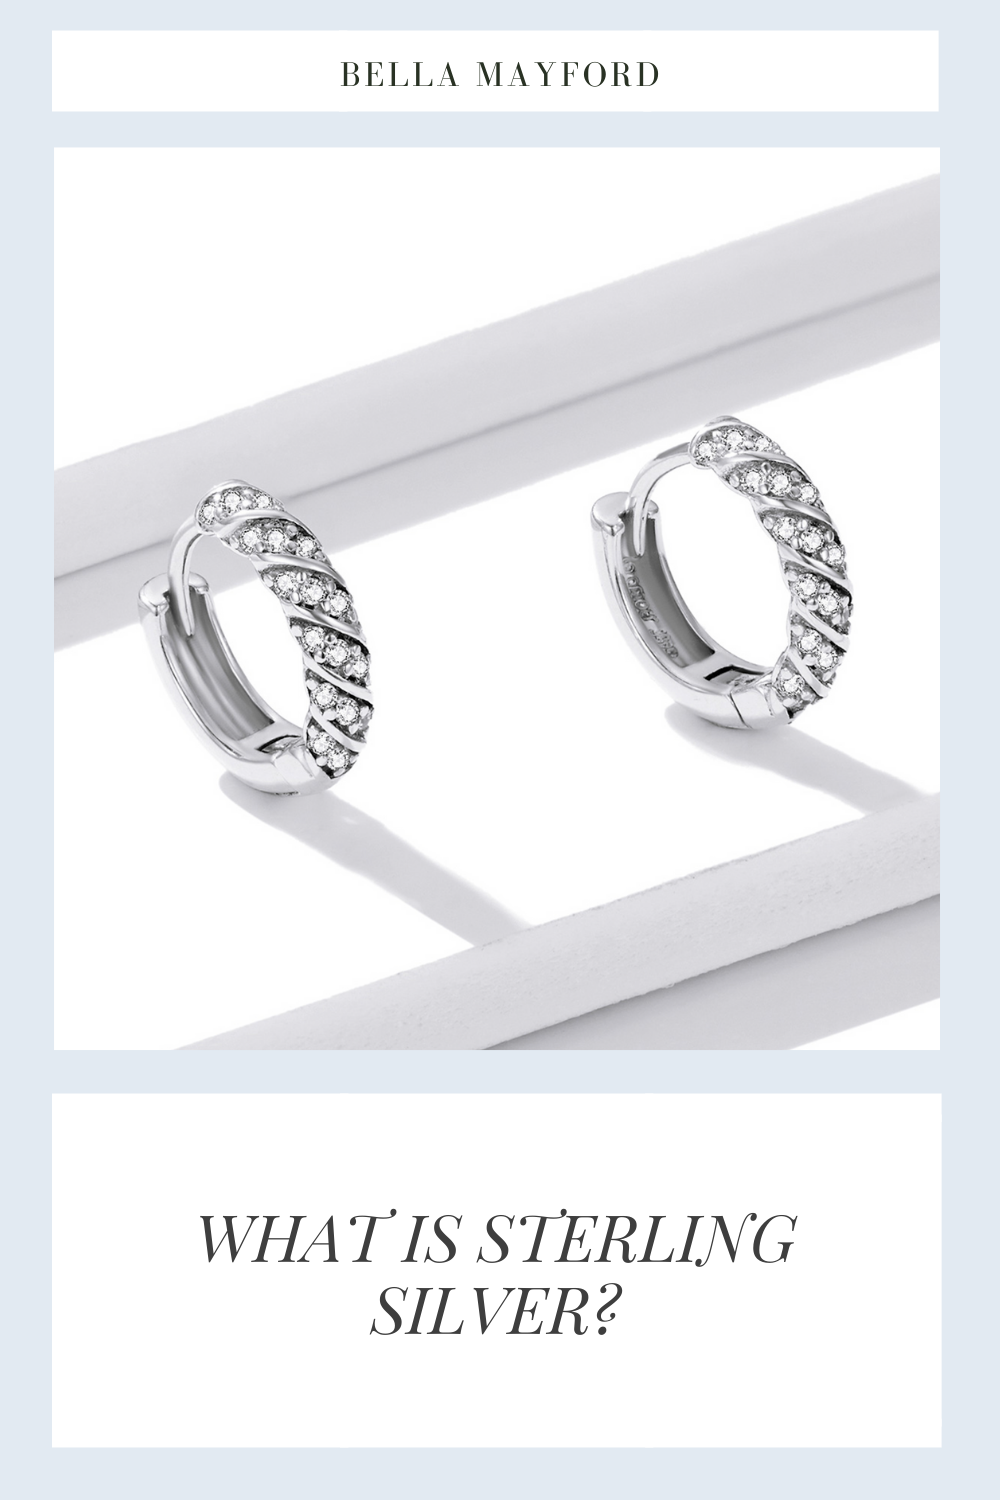 WHAT IS STERLING SILVER?